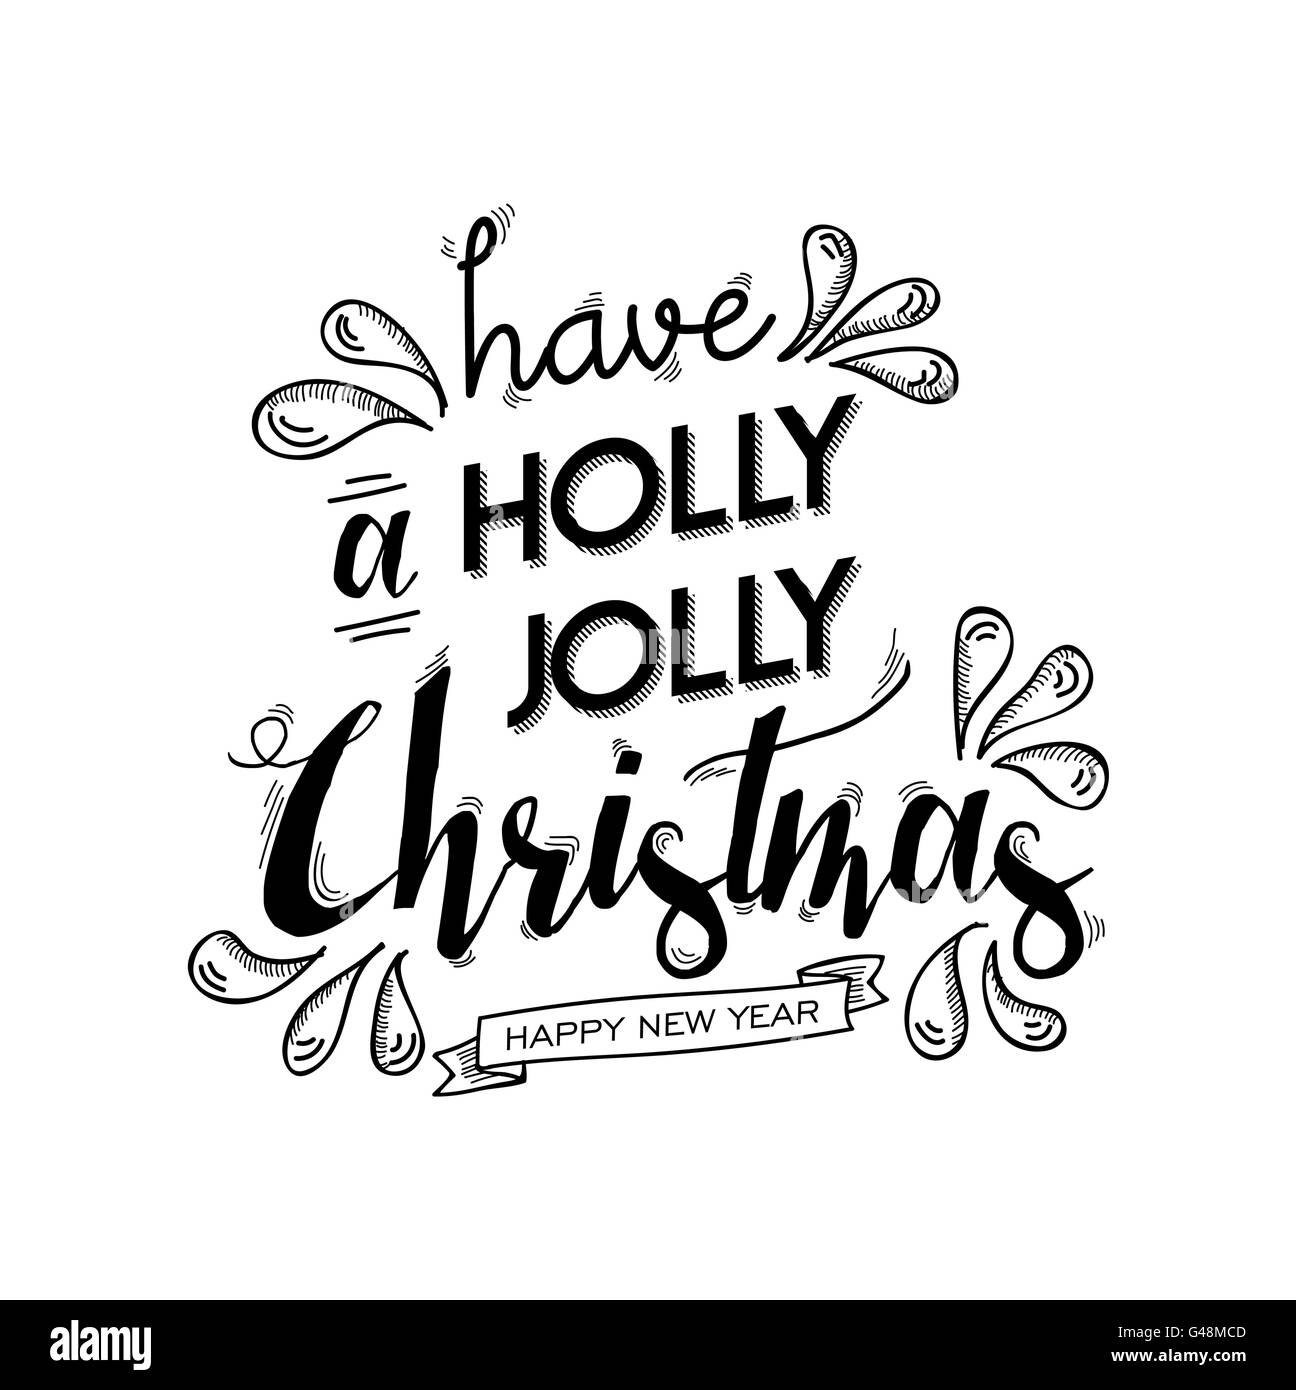 Merry christmas and happy new year wish lettering design. Xmas ...